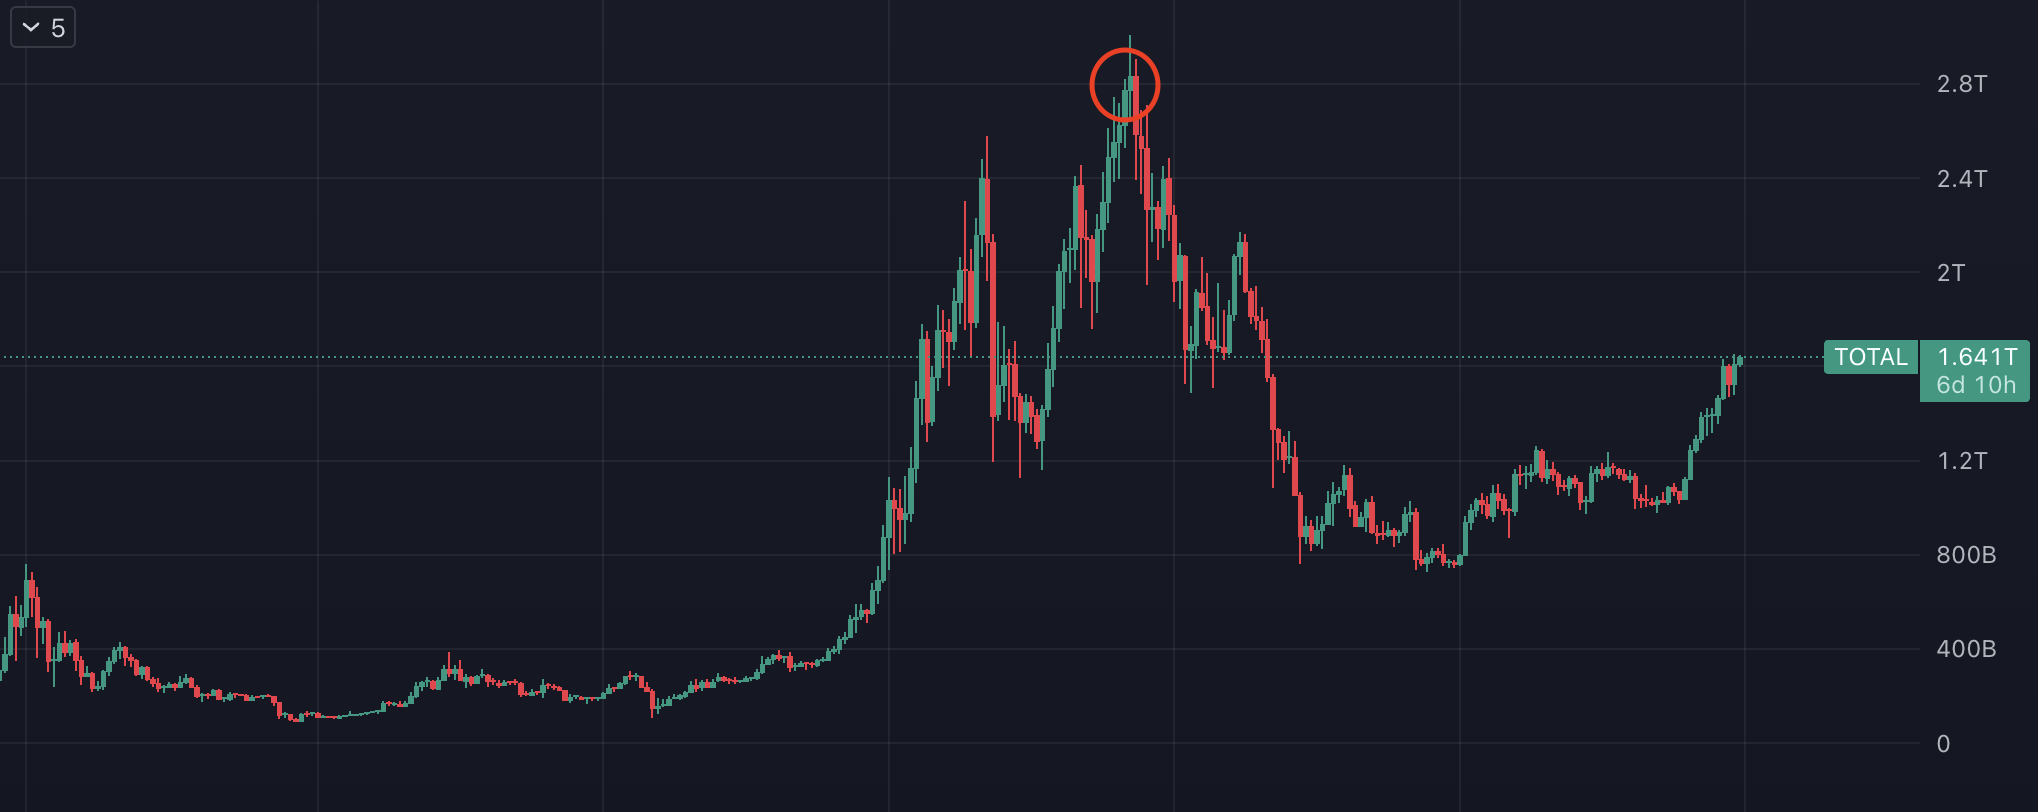 A screenshot of TOTAL marketcap chart with circle around the point on the chart, which is near the all time high, at which we raised.